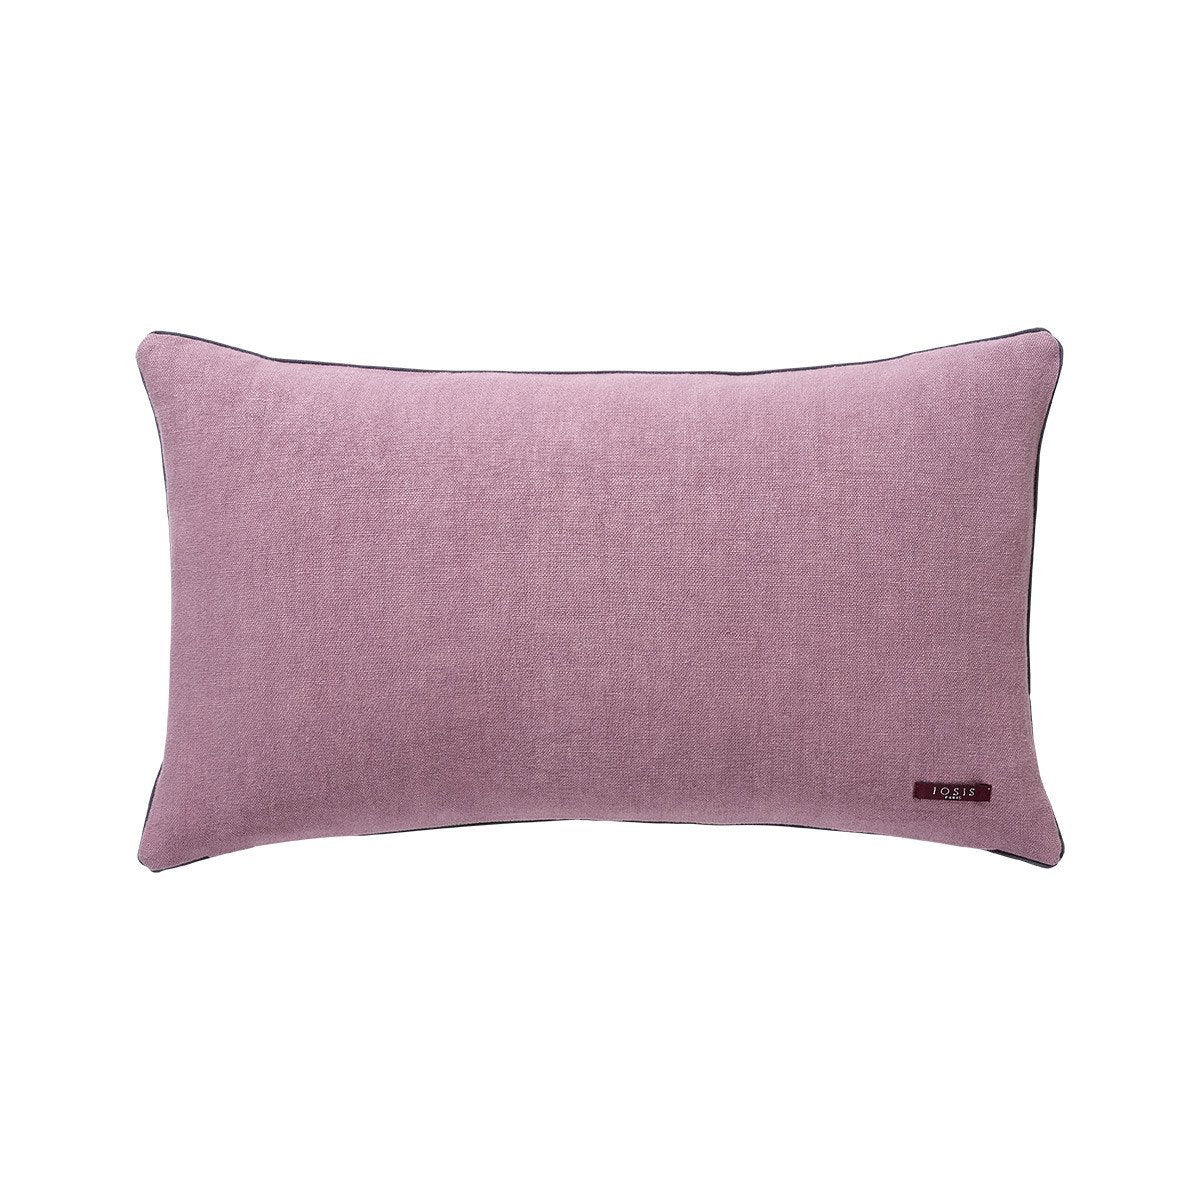 Reverse - Pigment Blush Decorative Pillow by Iosis | Fig Linens and Home